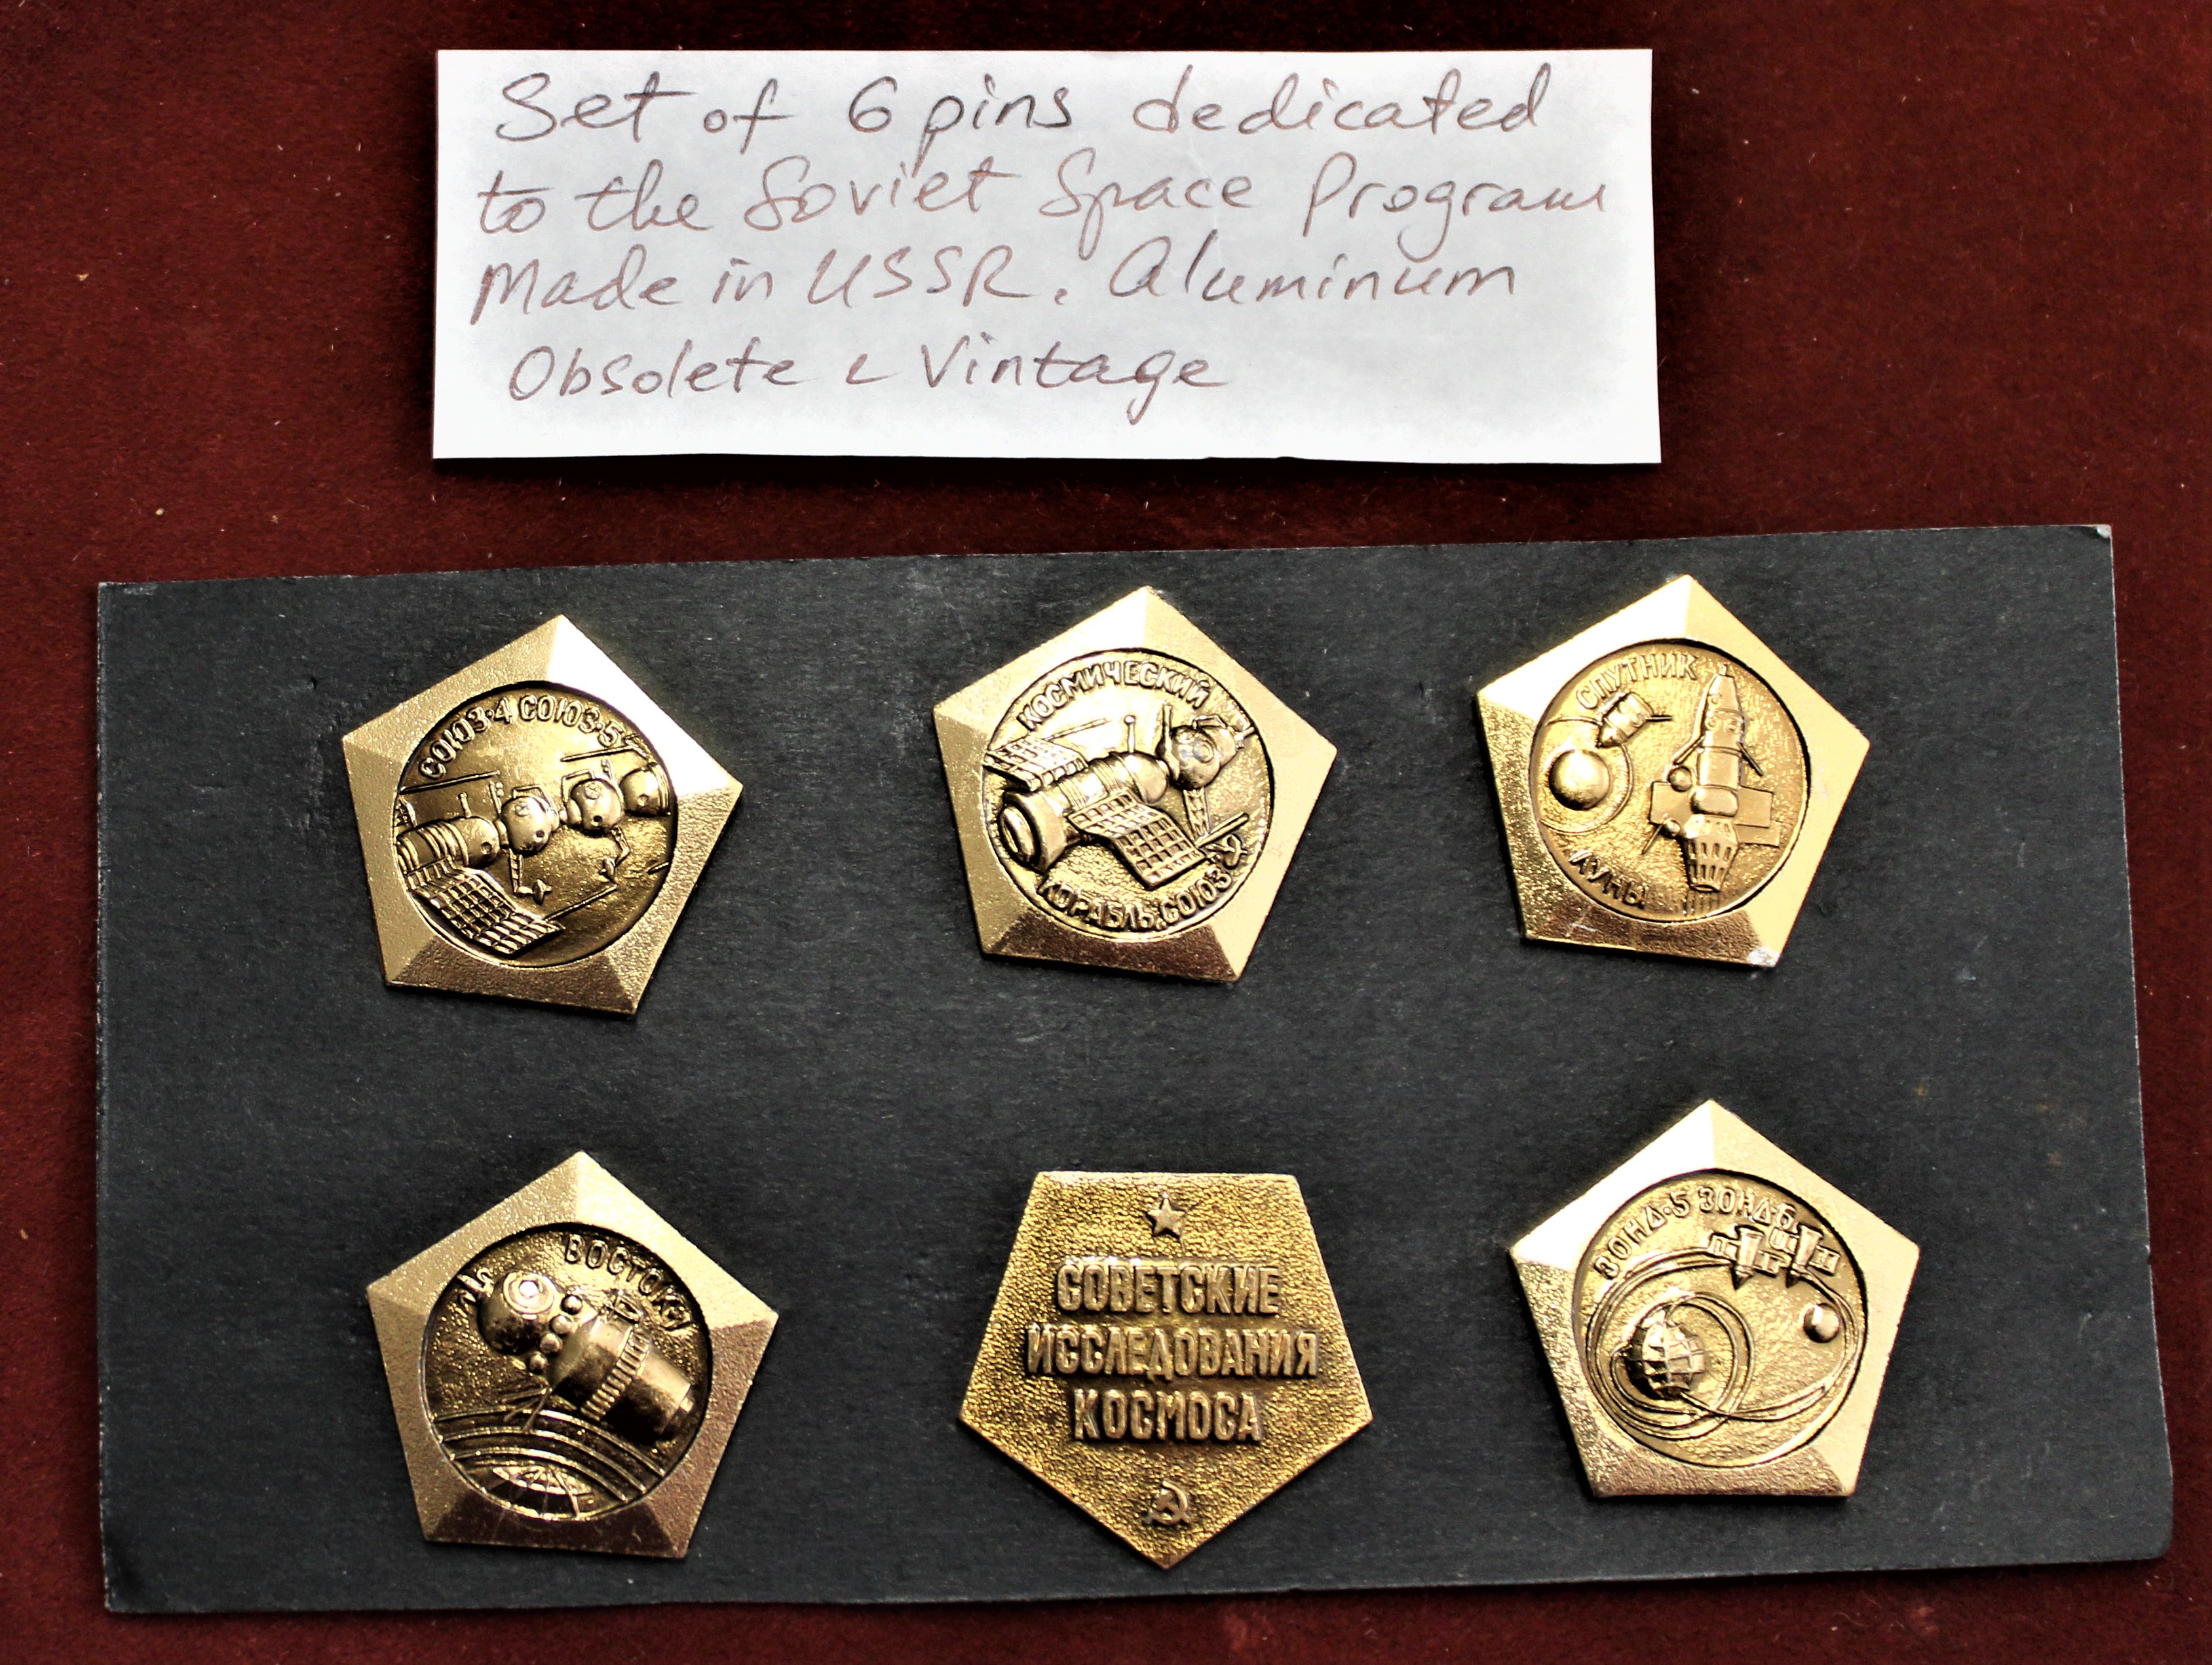 Russian Soviet set of six pins dedicated to the Soviet Space Program, they show the various types of